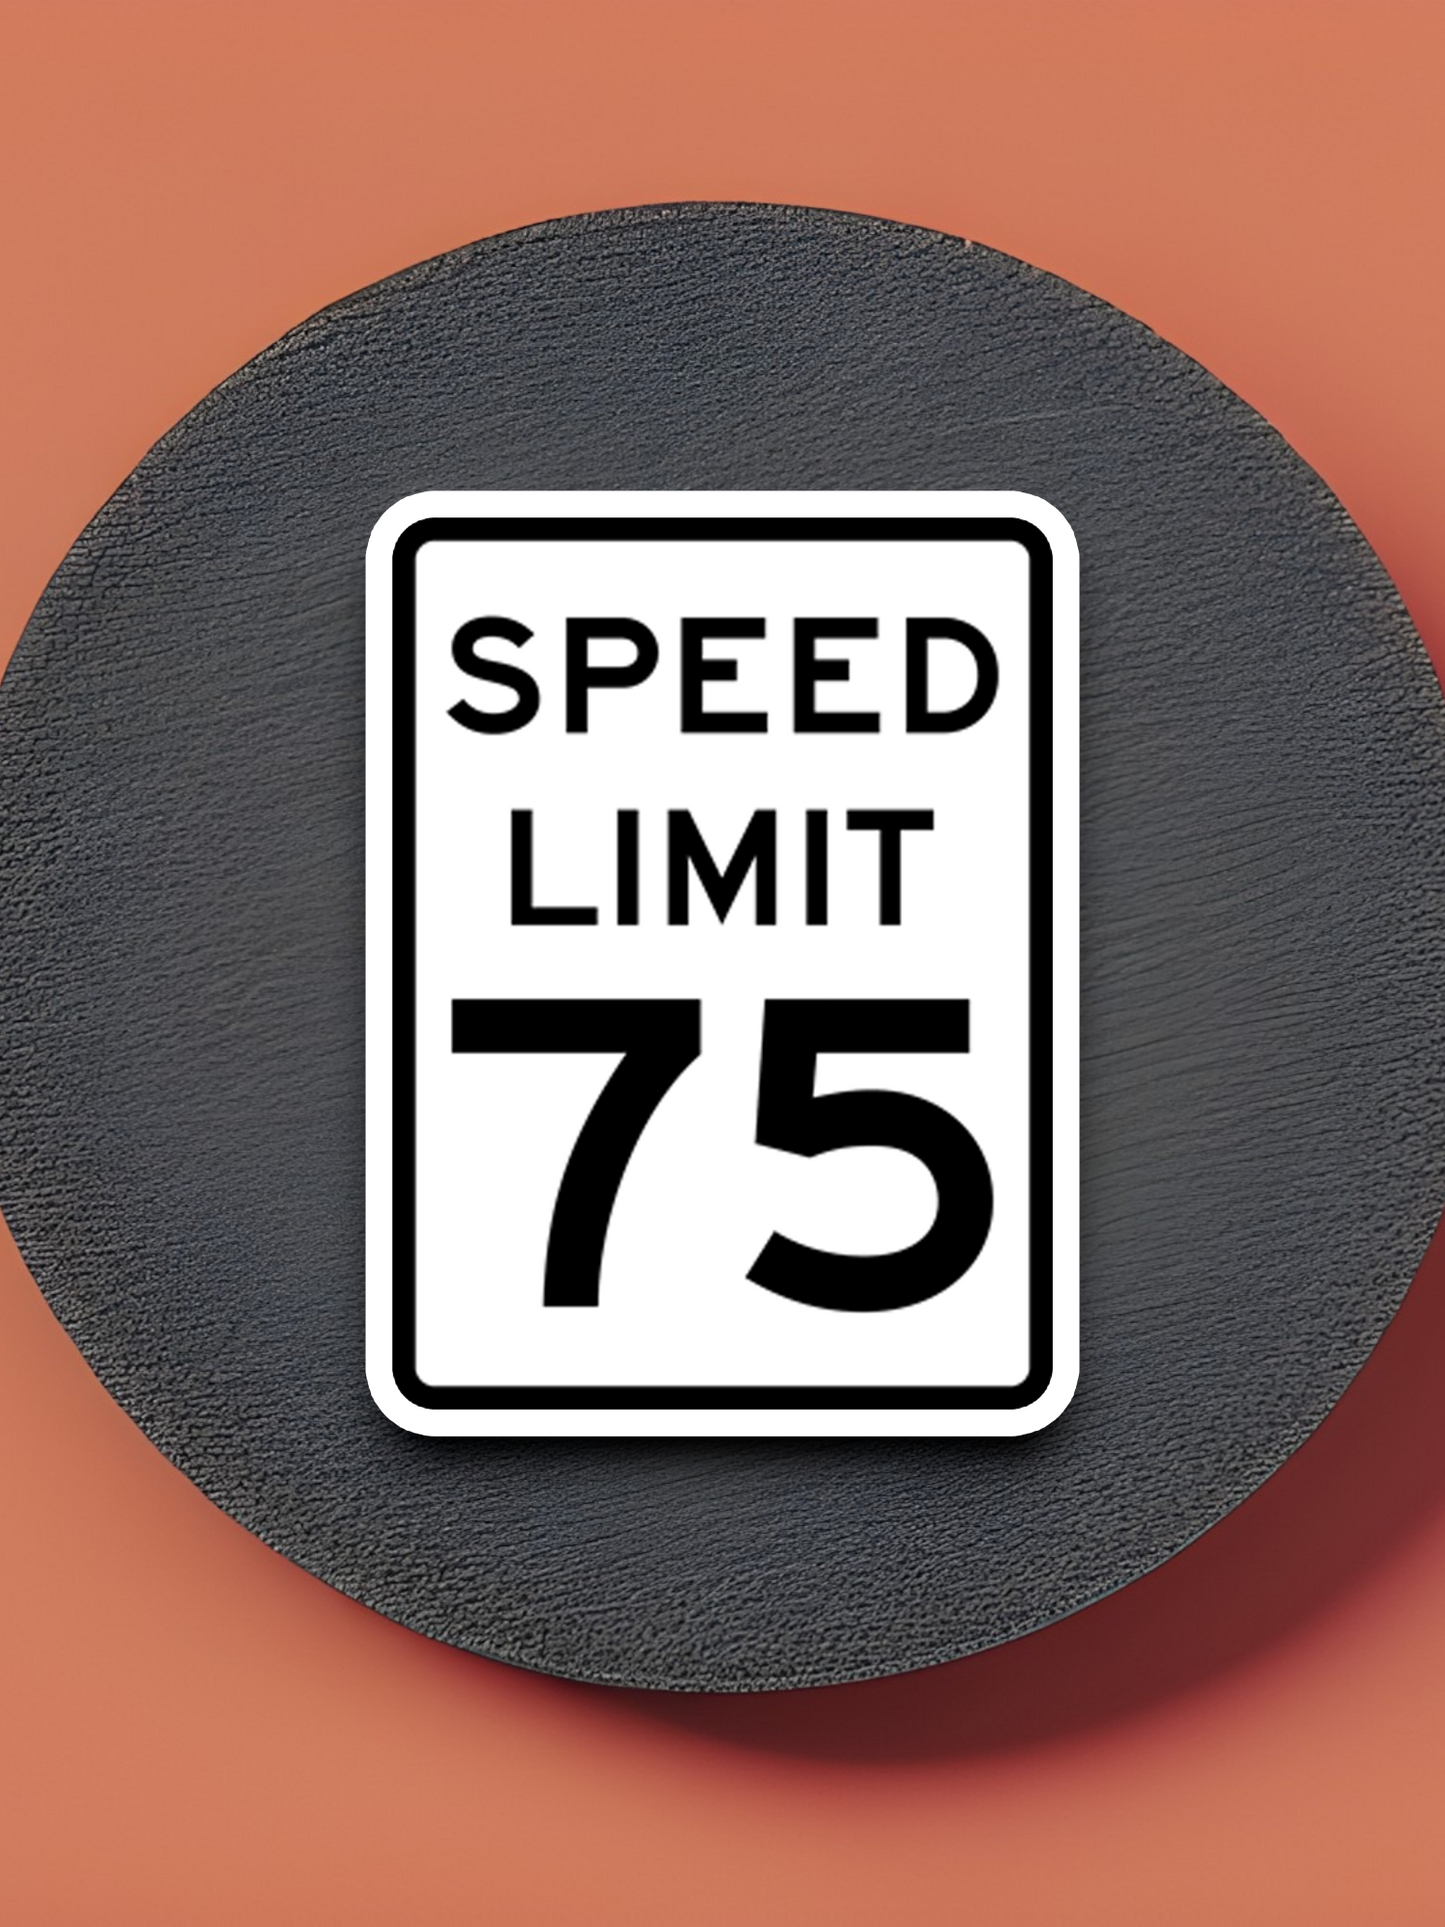 75 Miles Per Hour Speed Limit Road Sign Sticker